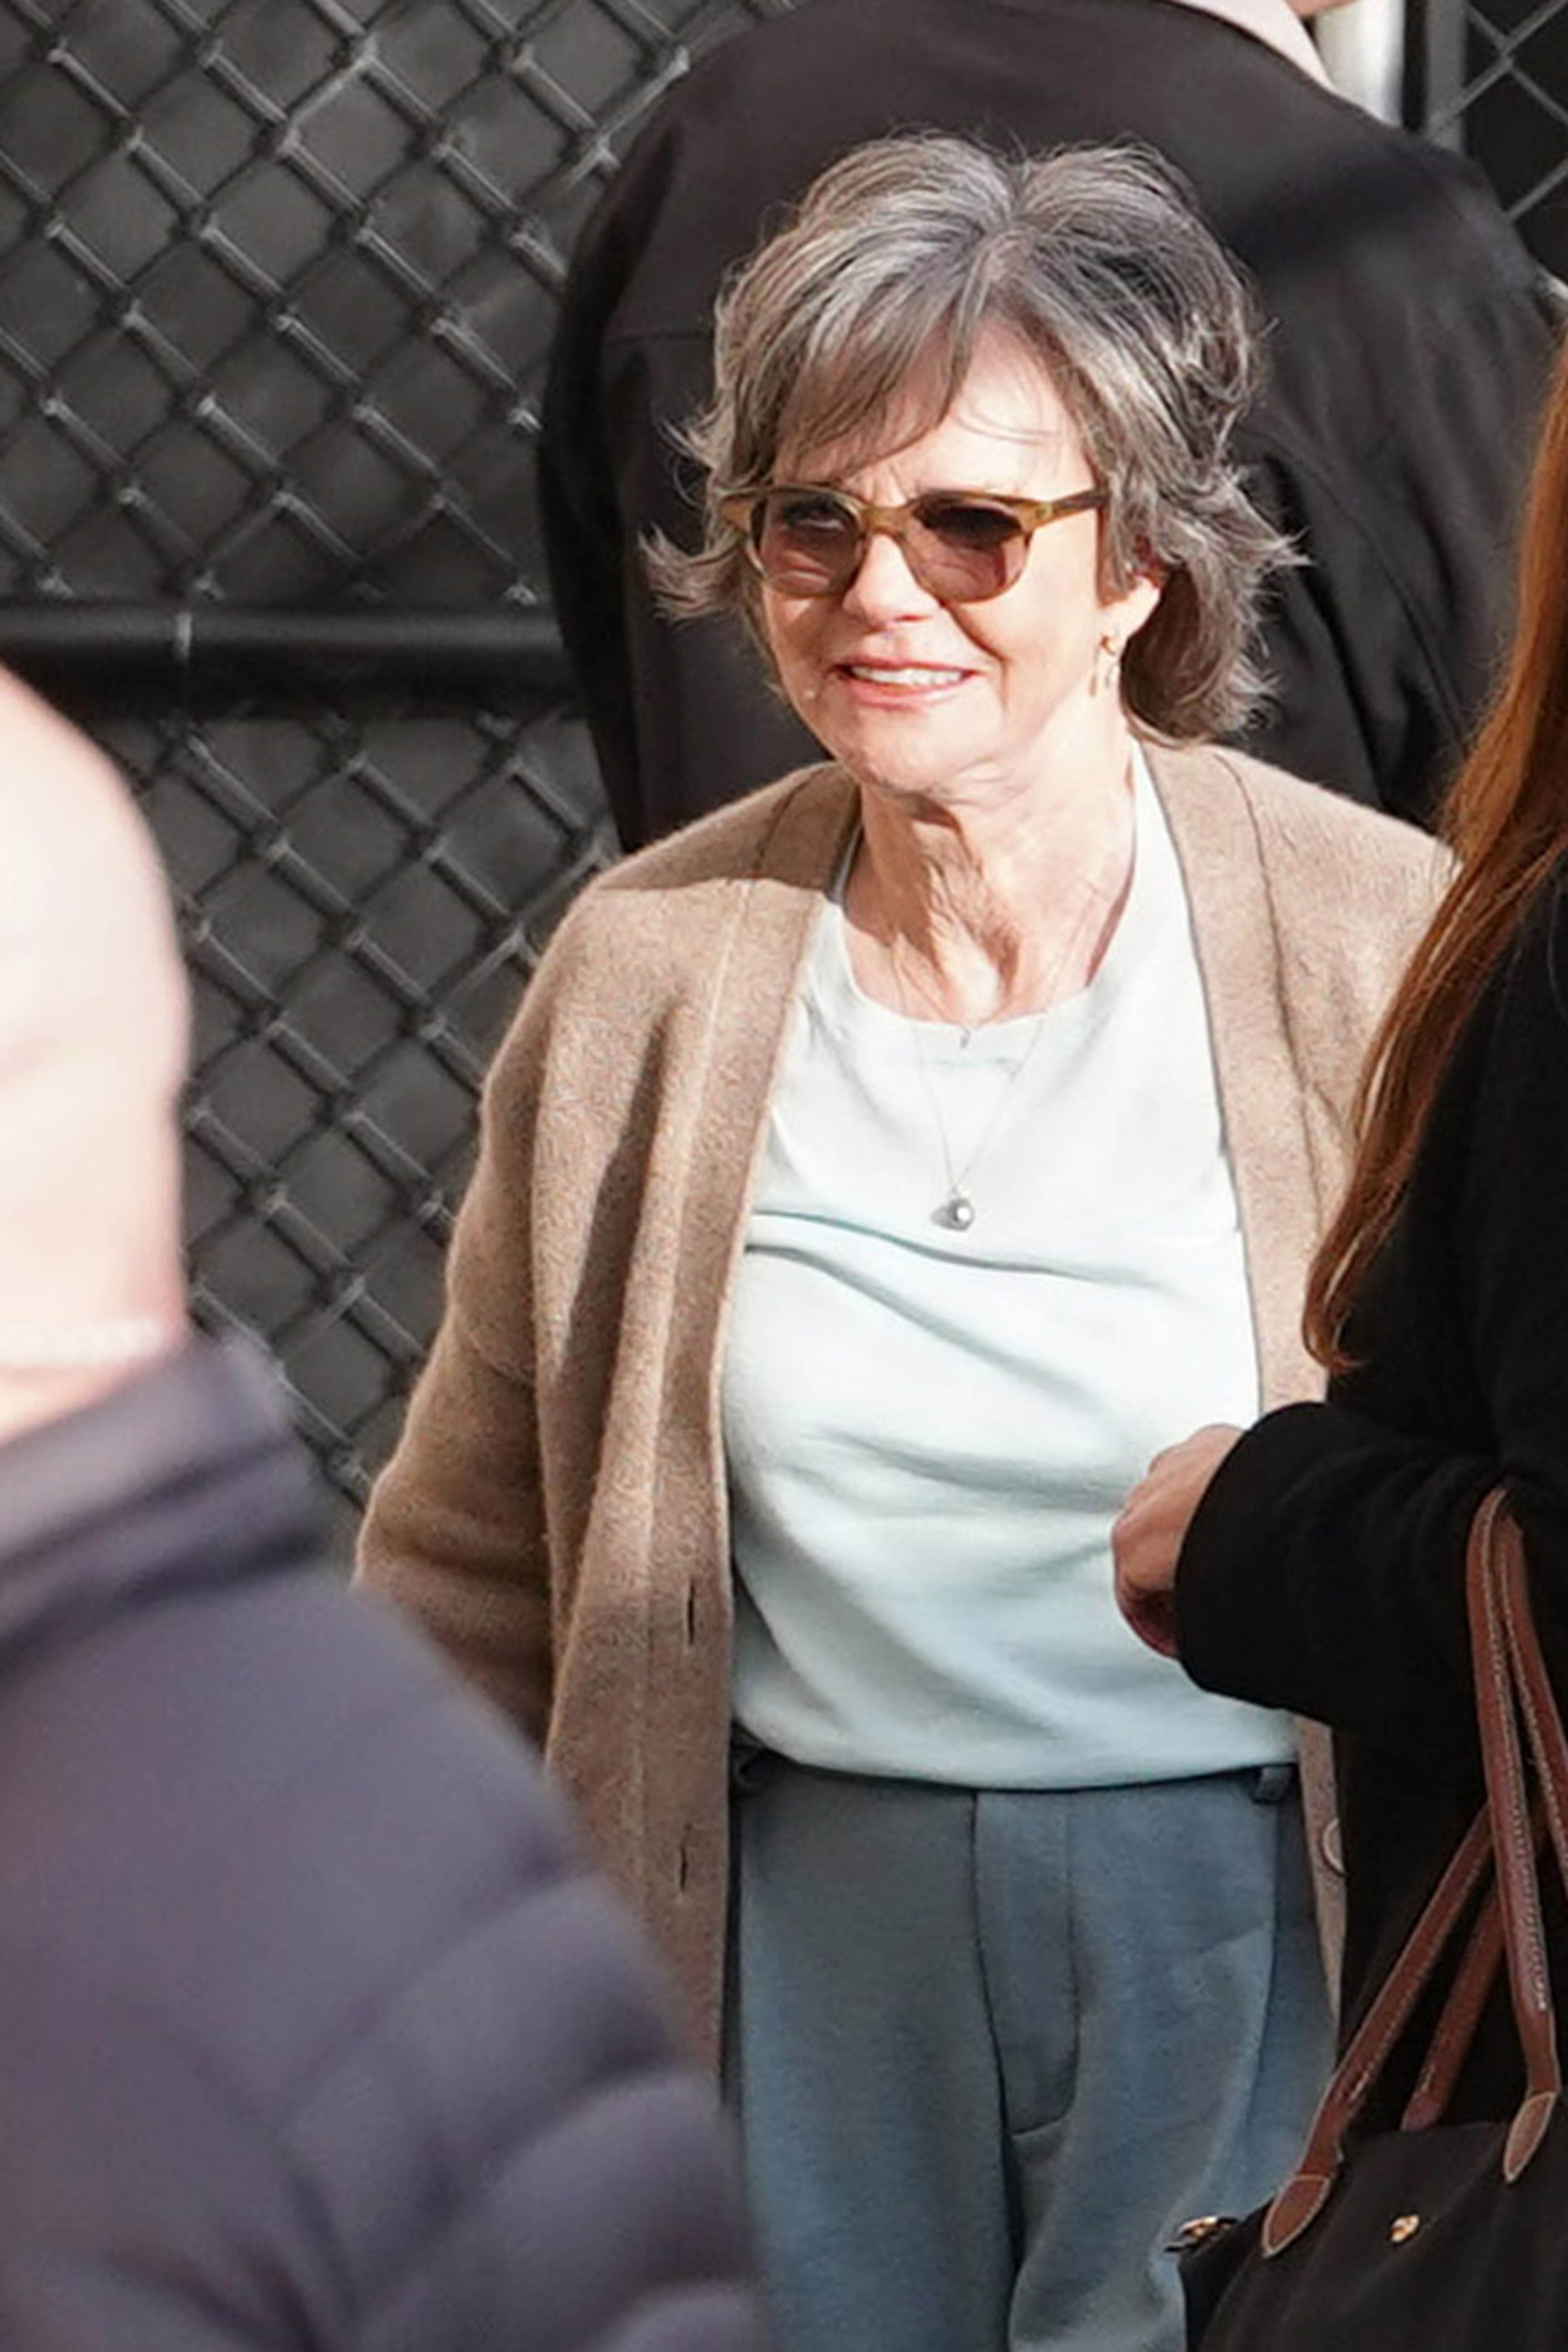 Sally Field is seen on January 19, 2023, in Los Angeles, California. | Source: Getty Images